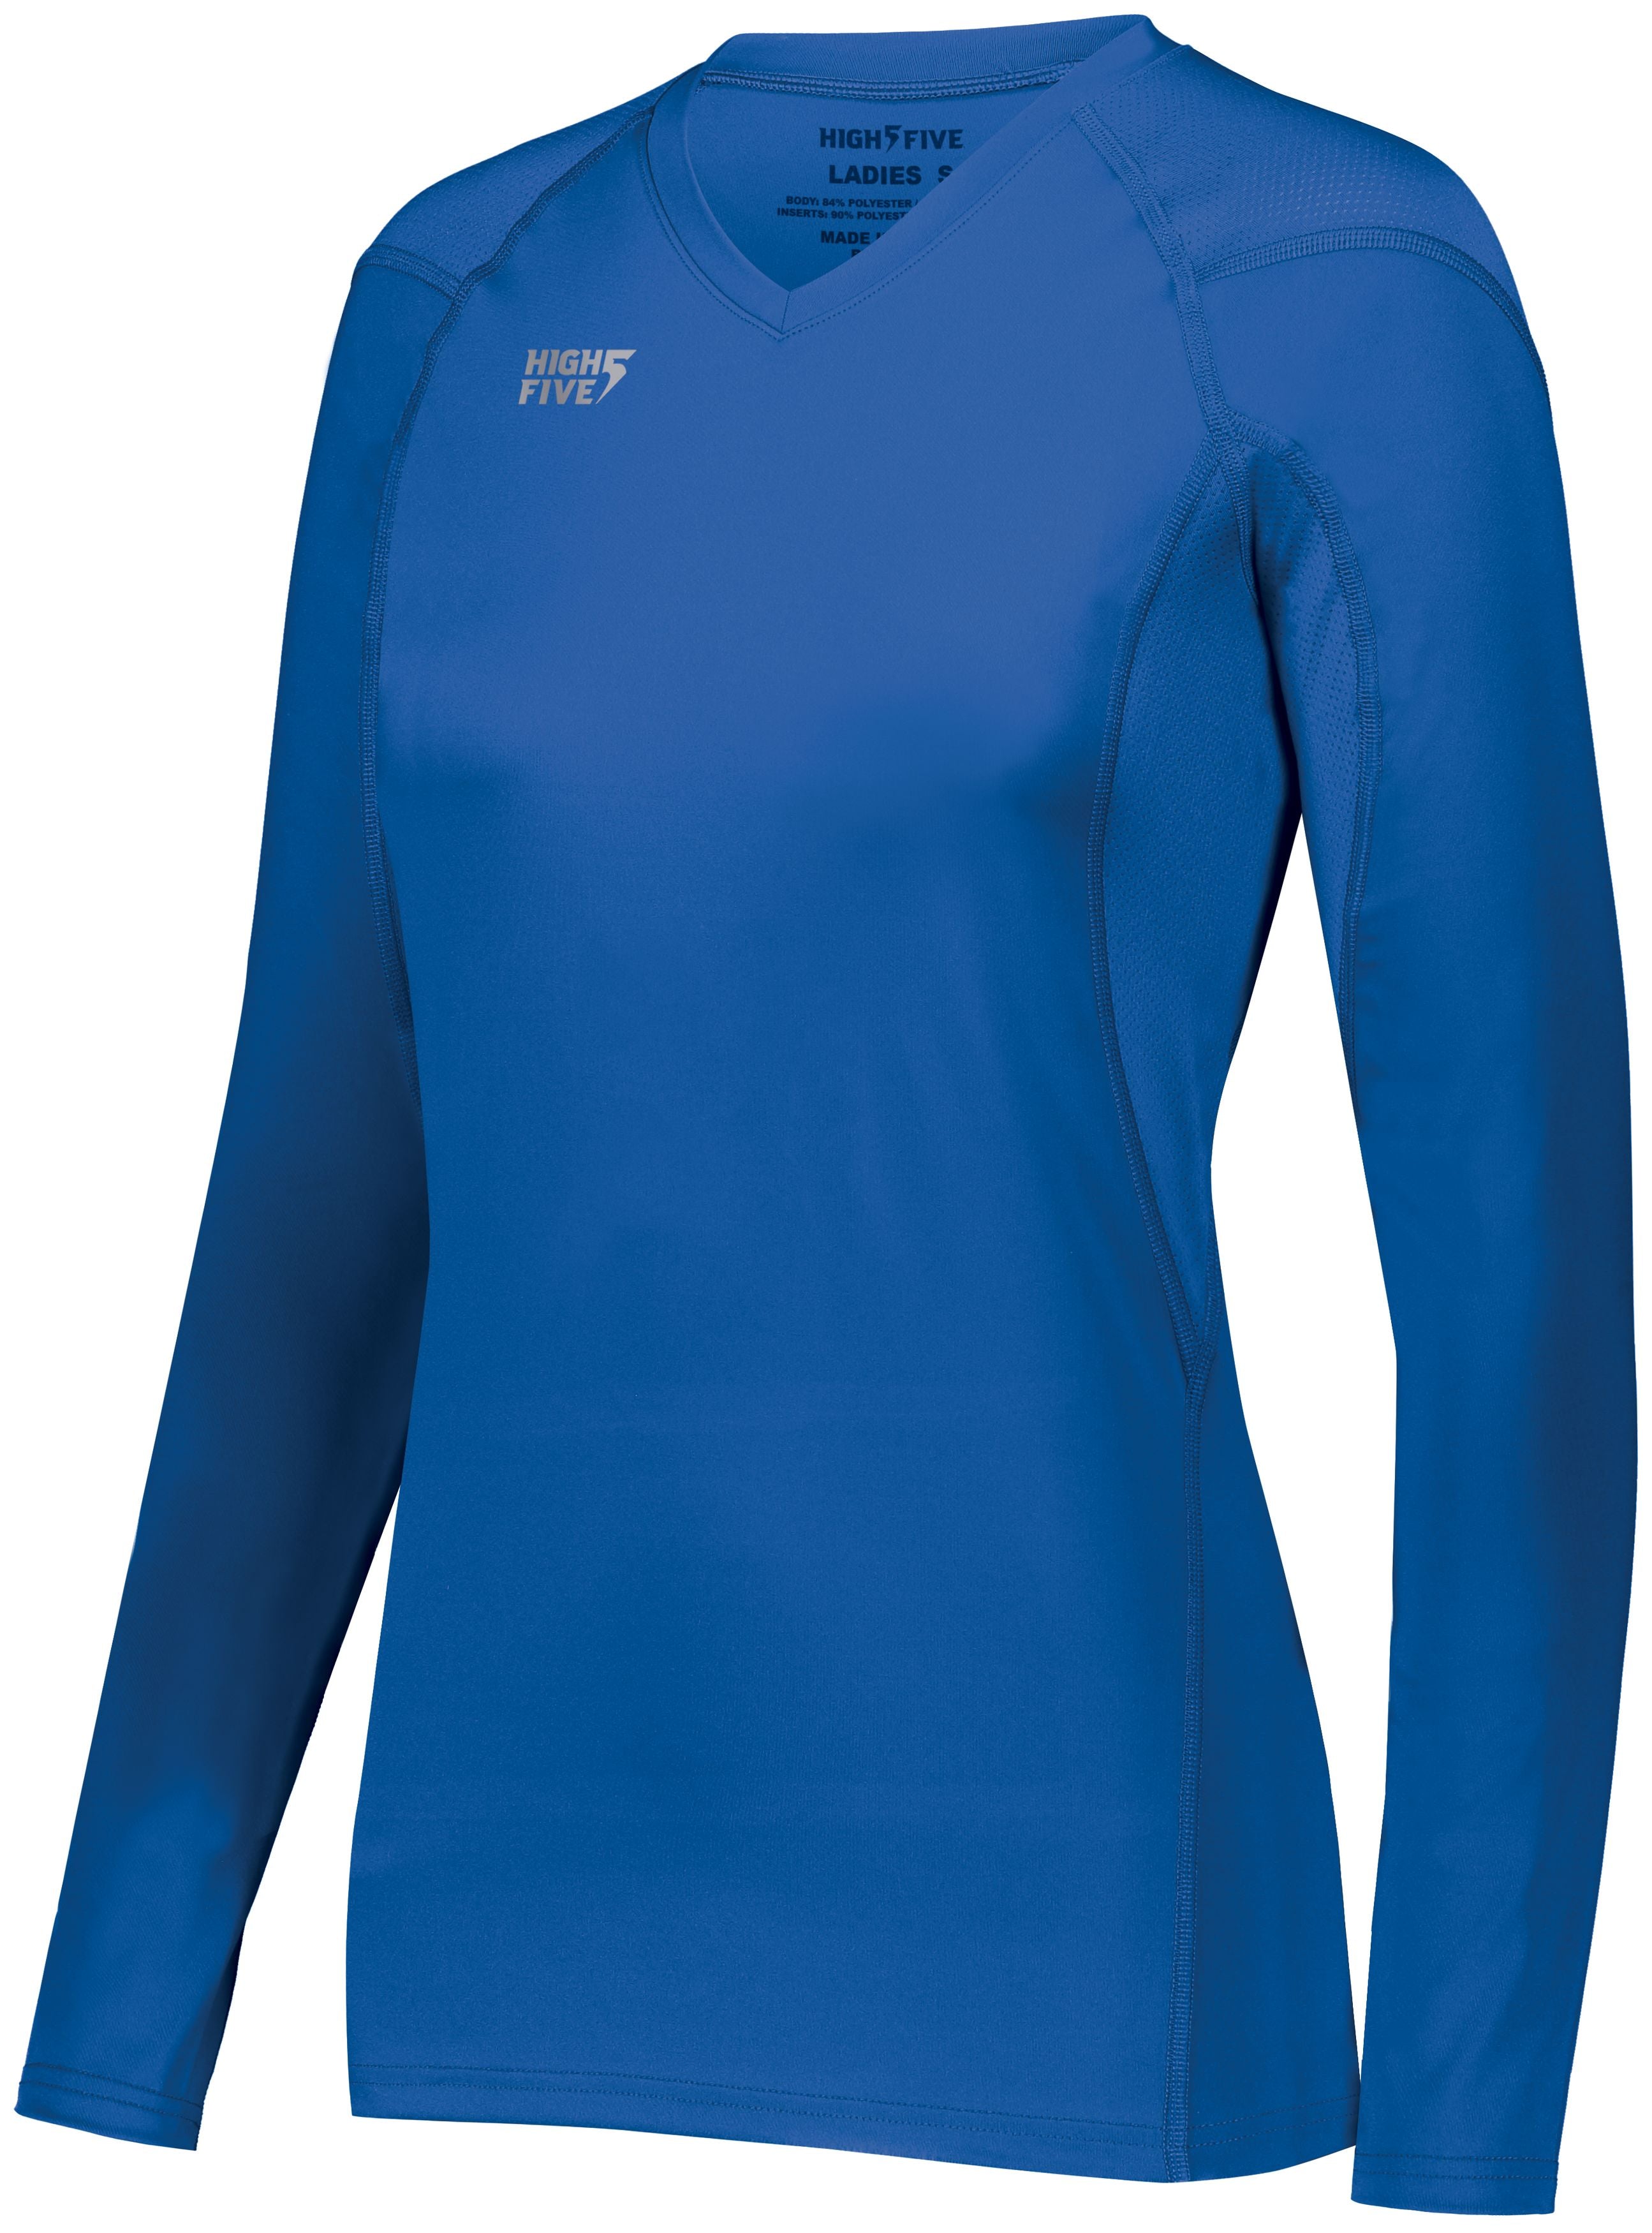 High 5 Girls Truhit Long Sleeve Jersey in Royal  -Part of the Girls, High5-Products, Volleyball, Girls-Jersey, Shirts product lines at KanaleyCreations.com